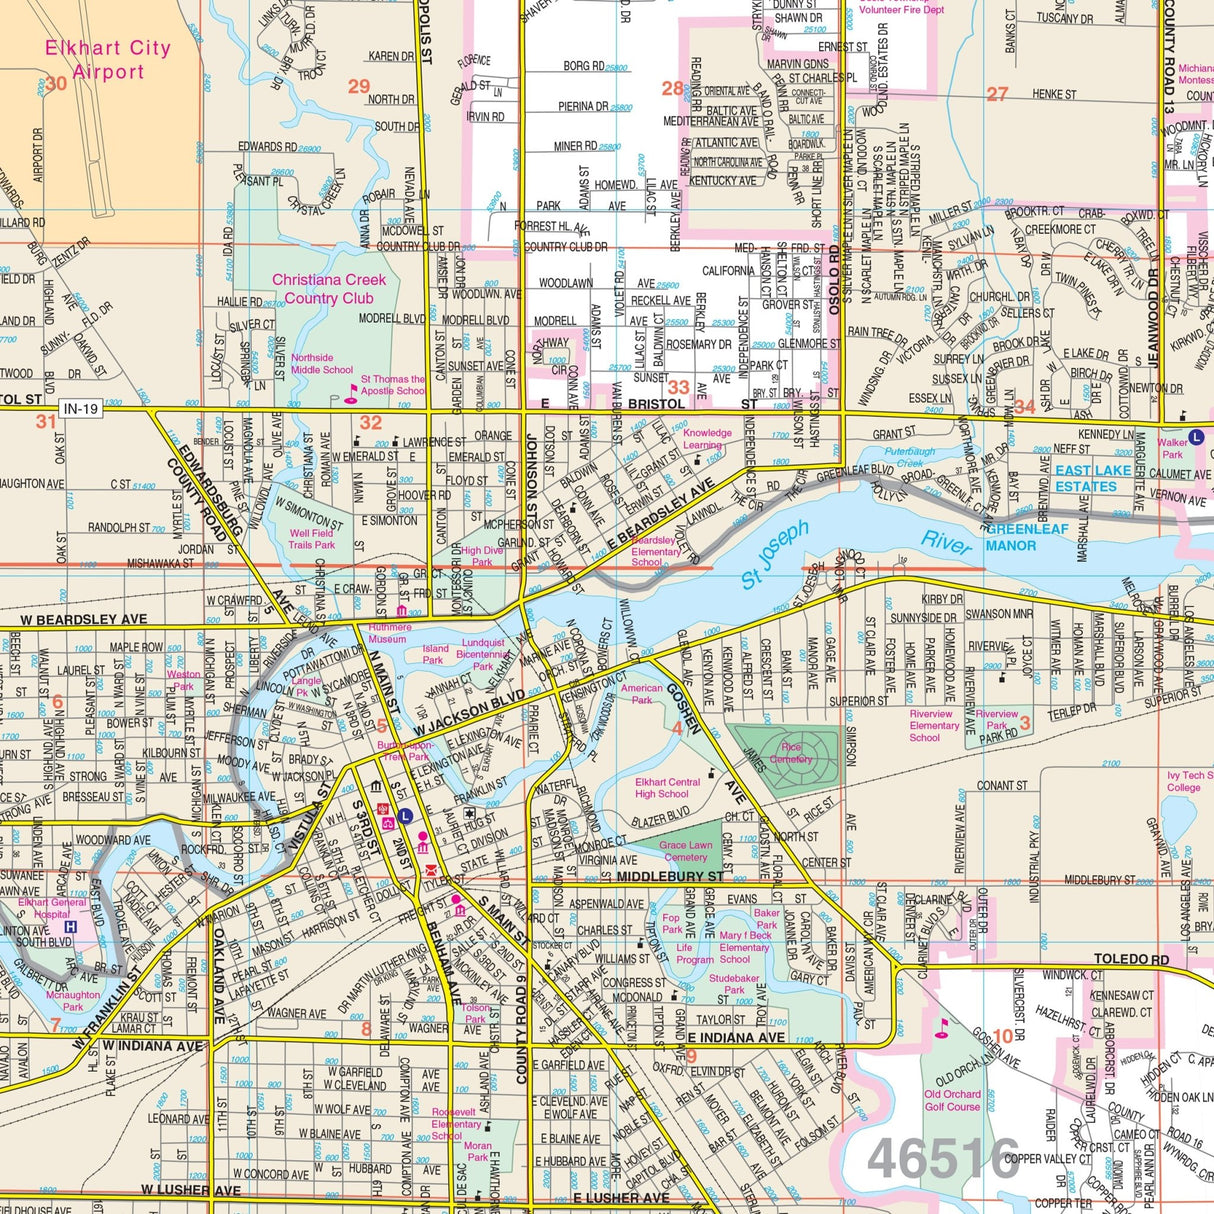 Elkhart County, IN Wall Map - KA-C-IN-ELKHART-PAPER - Ultimate Globes